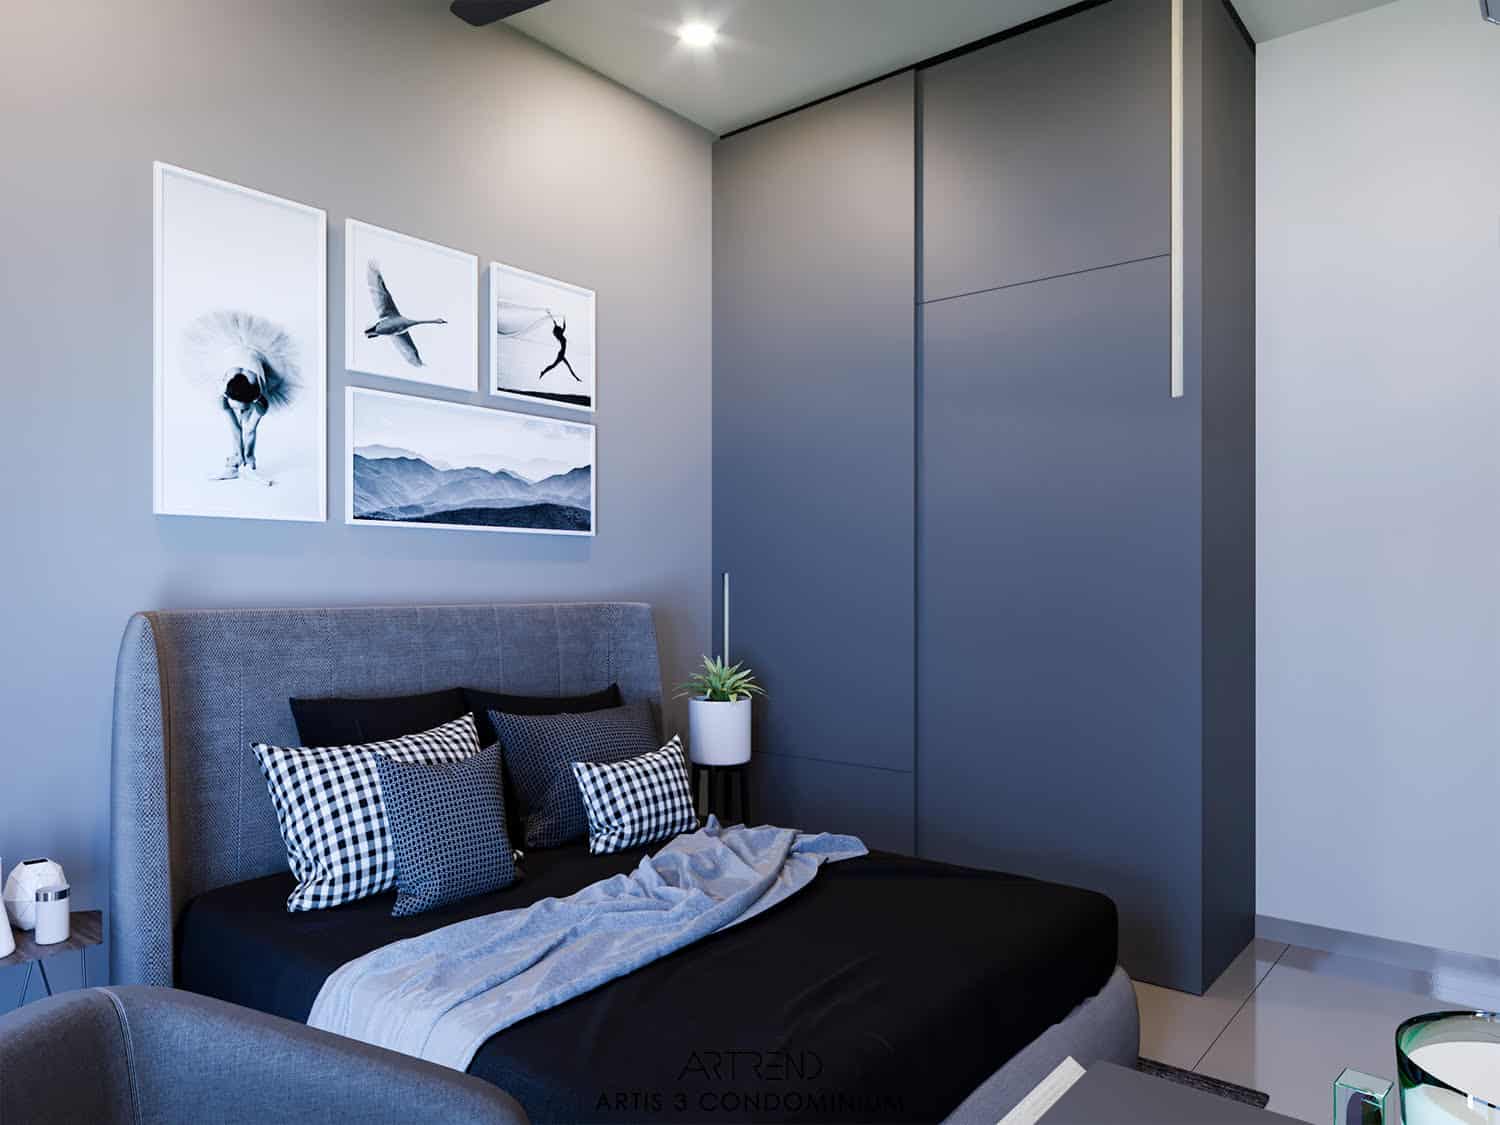 8 Small Bedroom Ideas That Get the Most Out of a Small Space